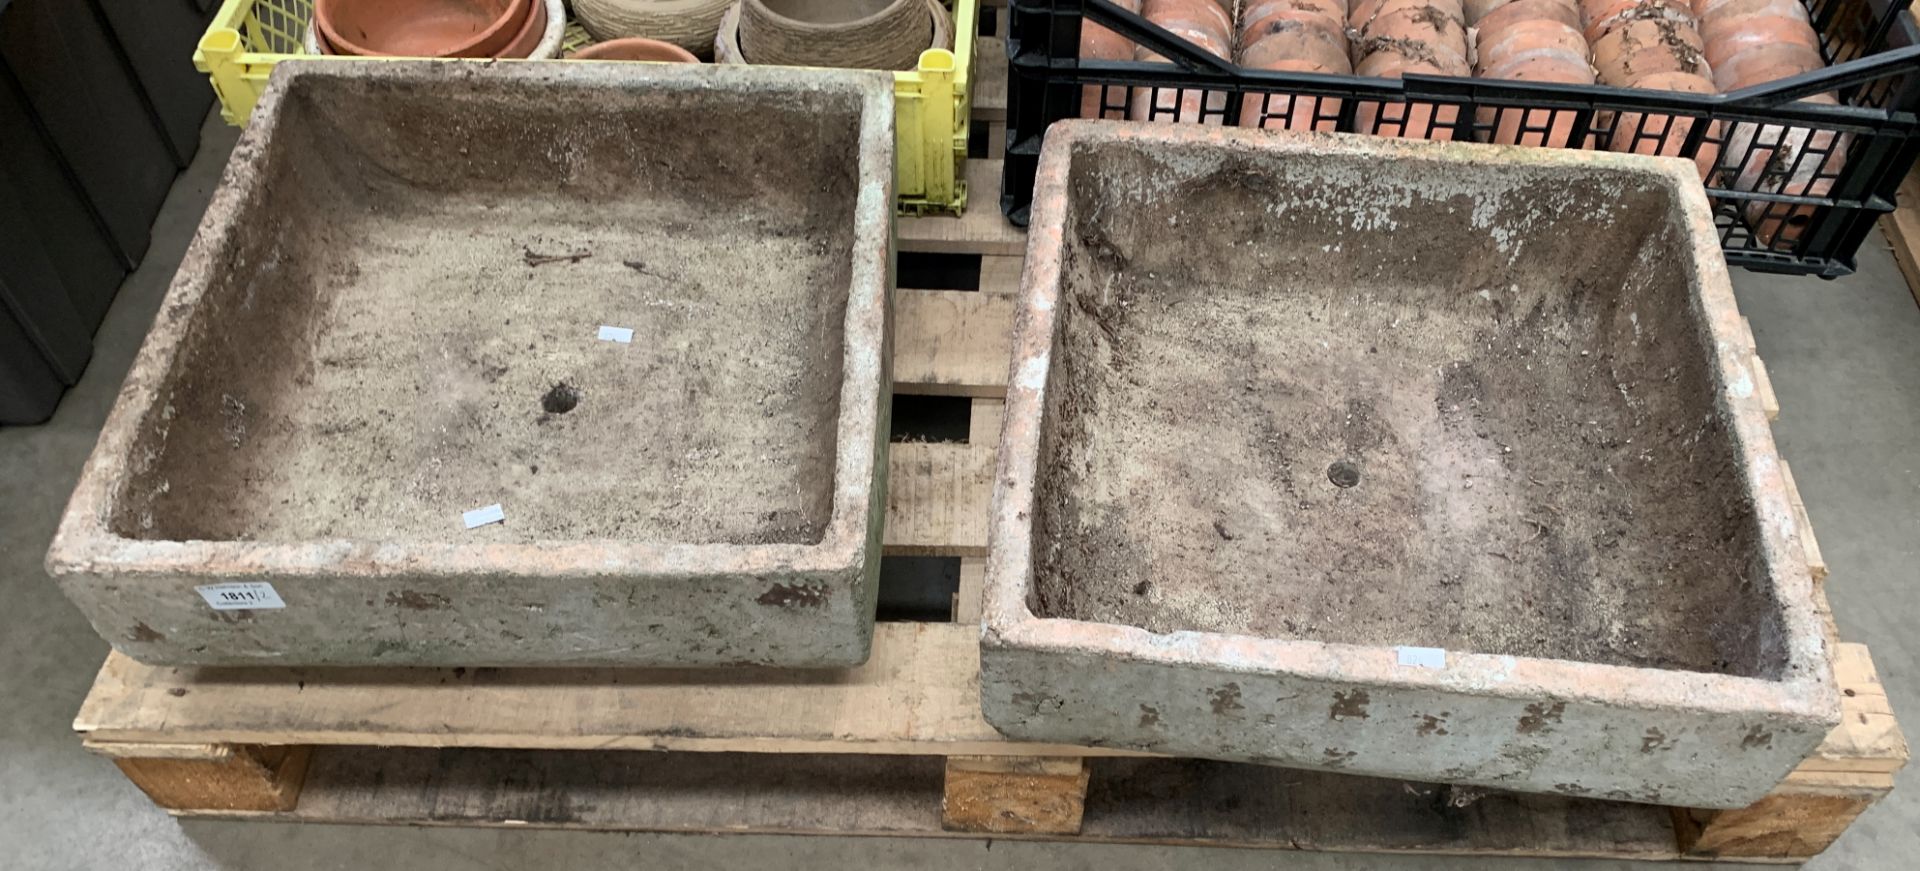 Two square ceramic plant containers 41 x 41 x 13cm - both have central drainage holes